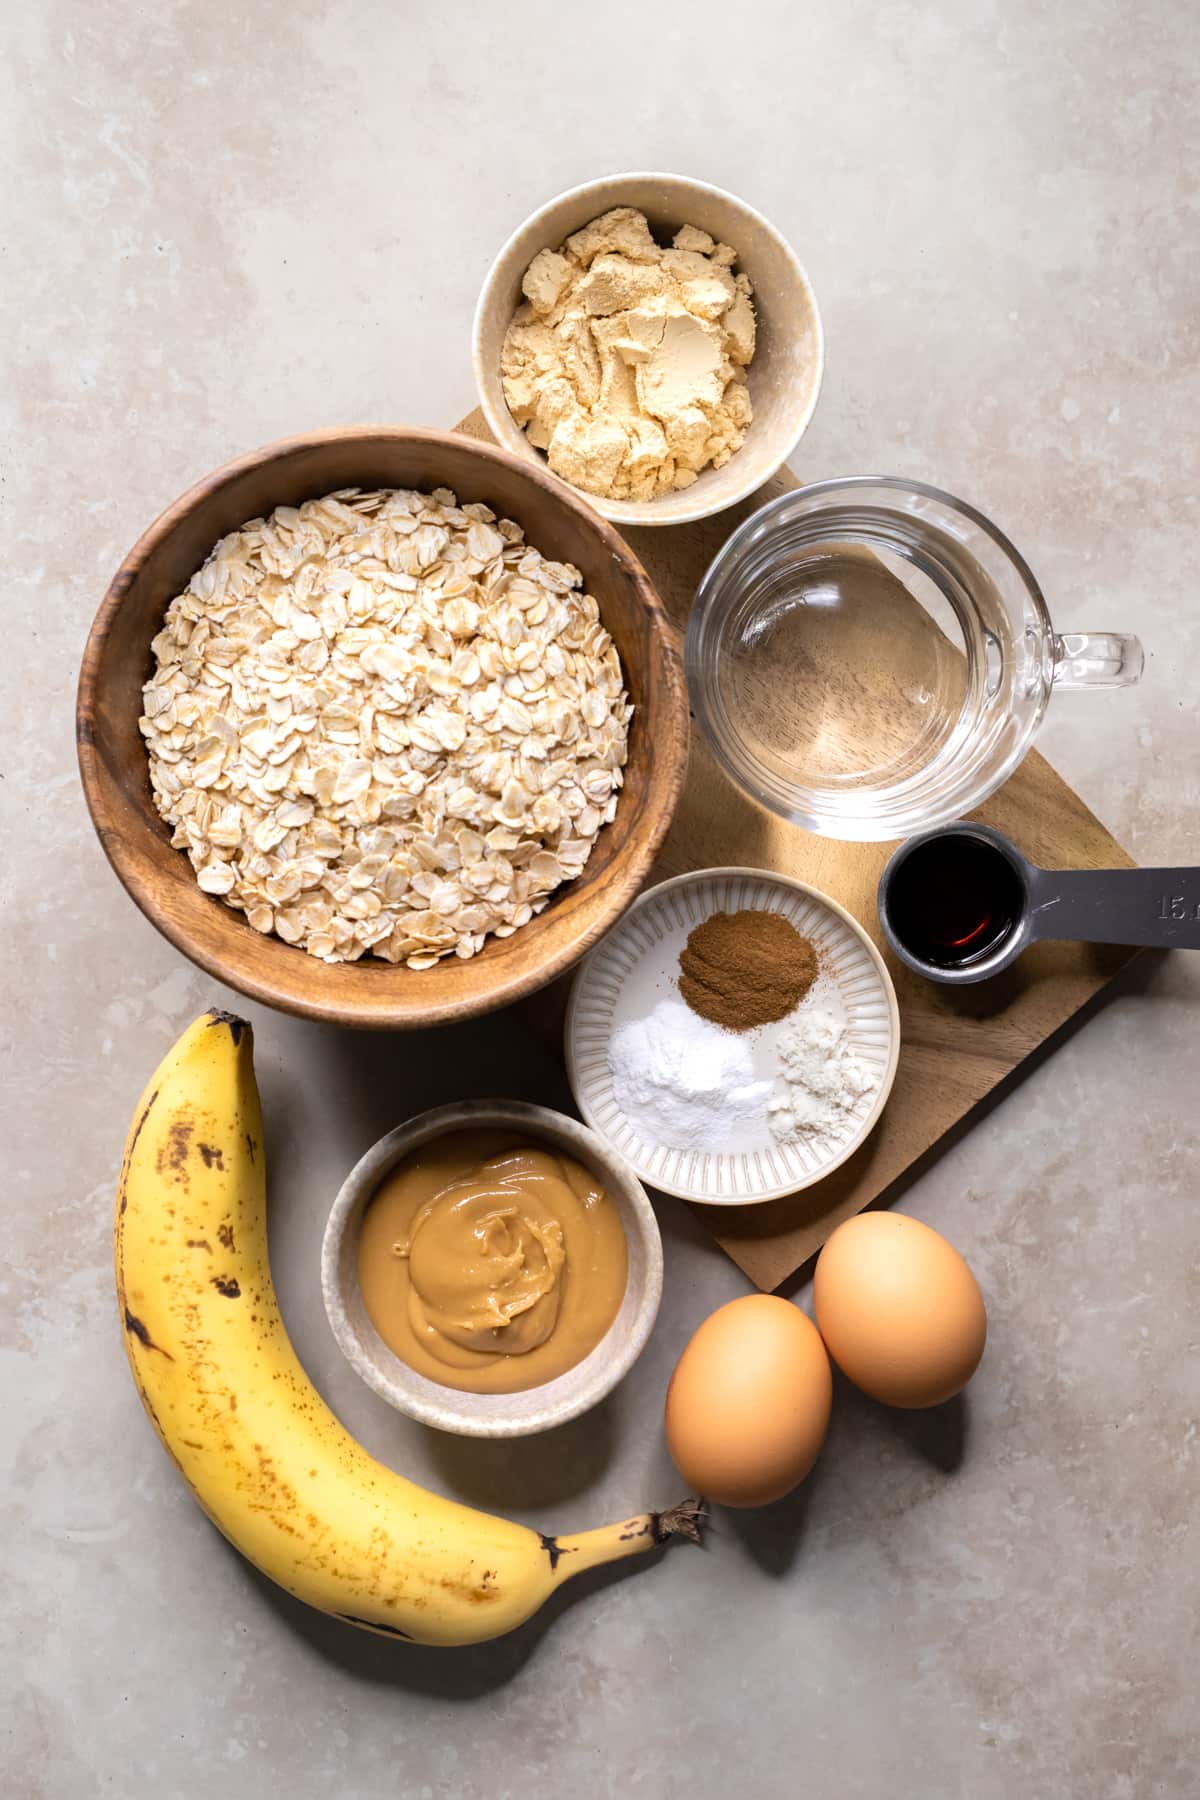 Ingredients for banana cinnamon baked oatmeal protein bars